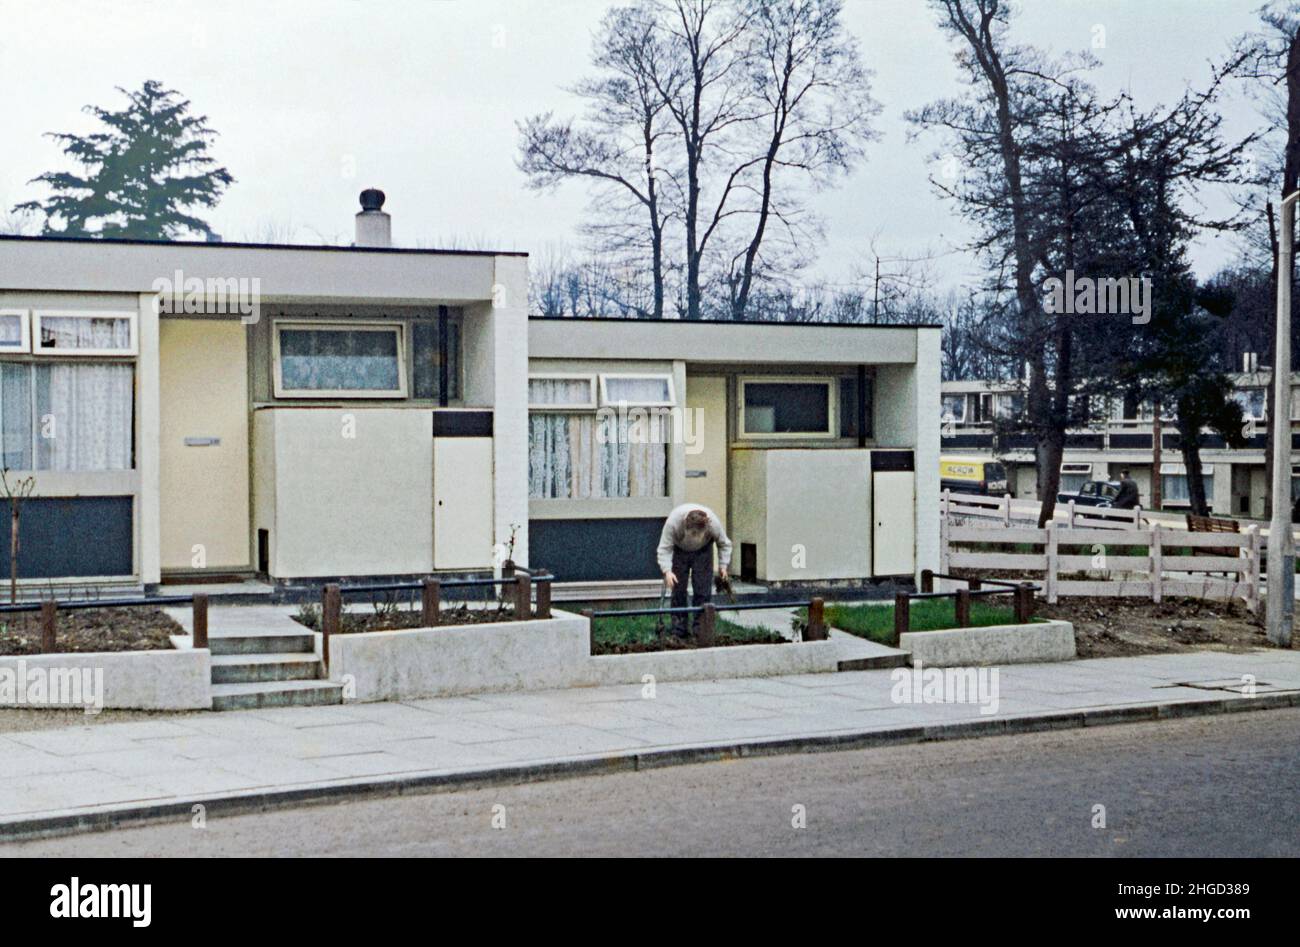 A 1960s photograph of single storey houses in Danebury Avenue, Roehampton, London, England, UK aimed at older retired residents. The area is part of the Alton Estate. Roehampton, a southwest London suburb, has a number of large council house estates. The London County Council (LCC) built the Roehampton Estate in the 1920s–30s and the Alton Estate in the 1950s. The Alton Estate, one of the UK’s largest, has a mix of low and high-rise modernist architecture consisting of both Scandinavian-influenced and brutalist – a vintage 1960s photograph. Stock Photo